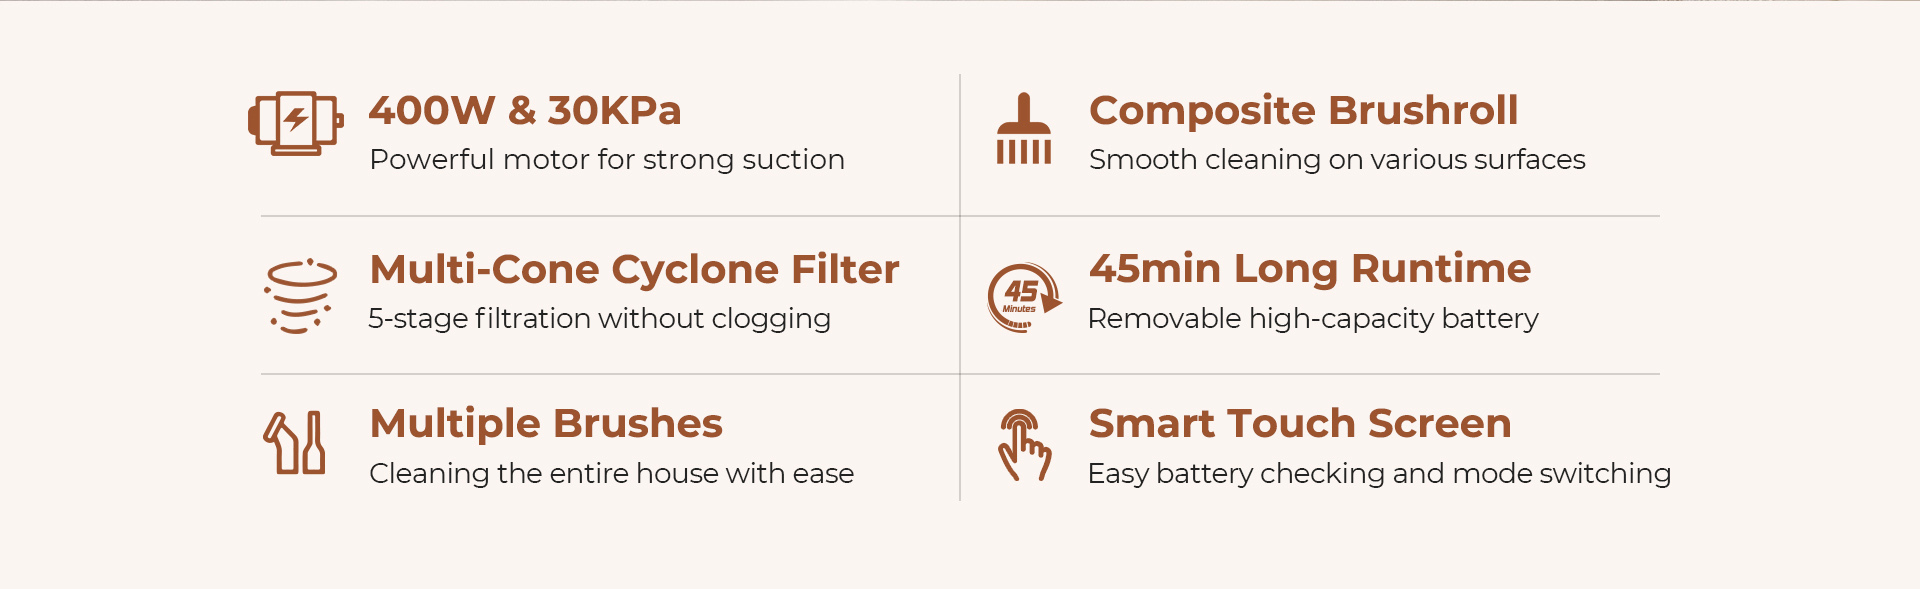 JIGOO C300 Cordless Vacuum Cleaner, 30KPa Suction, 400W Motor, 1.2L Dust Cup, 5-Stage Filtration, Up to 45 Mins Runtime, 2000mAh Removable Battery, LED Touch Screen, Rotatable Metal Tube